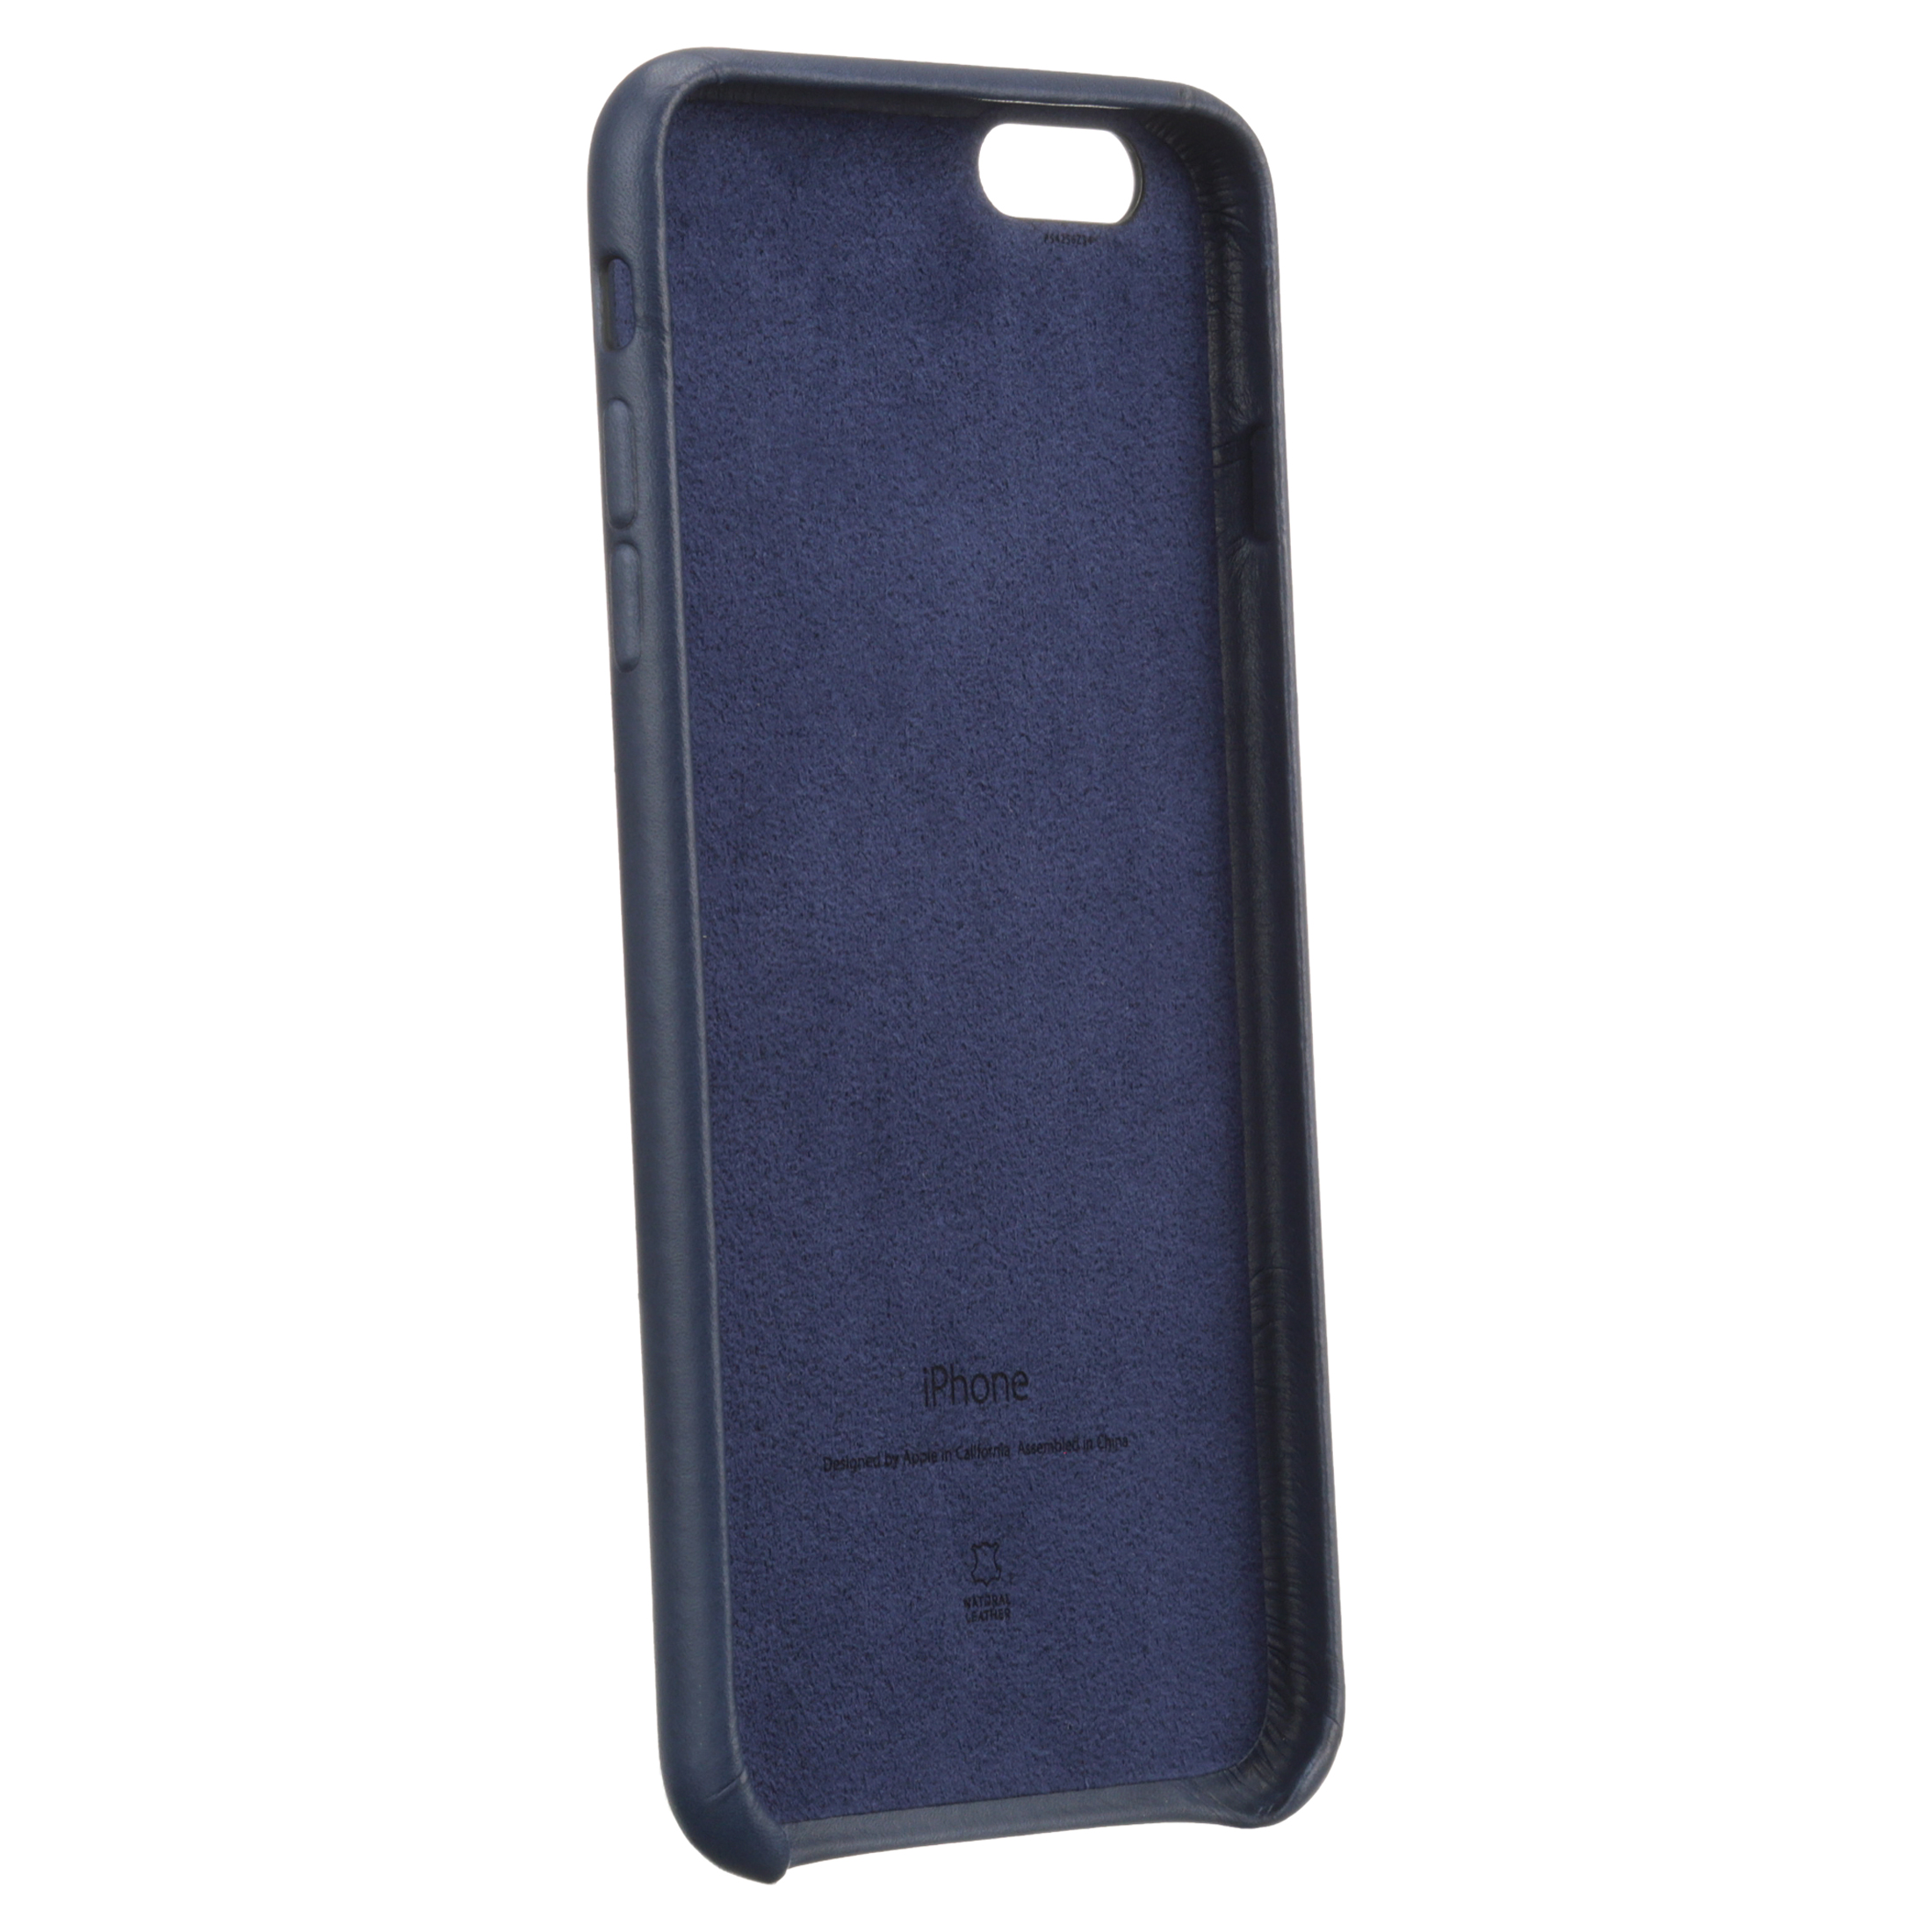 Apple Leather Case for iPhone 6s Plus and iPhone 6 Plus - Midnight Blue - image 5 of 9